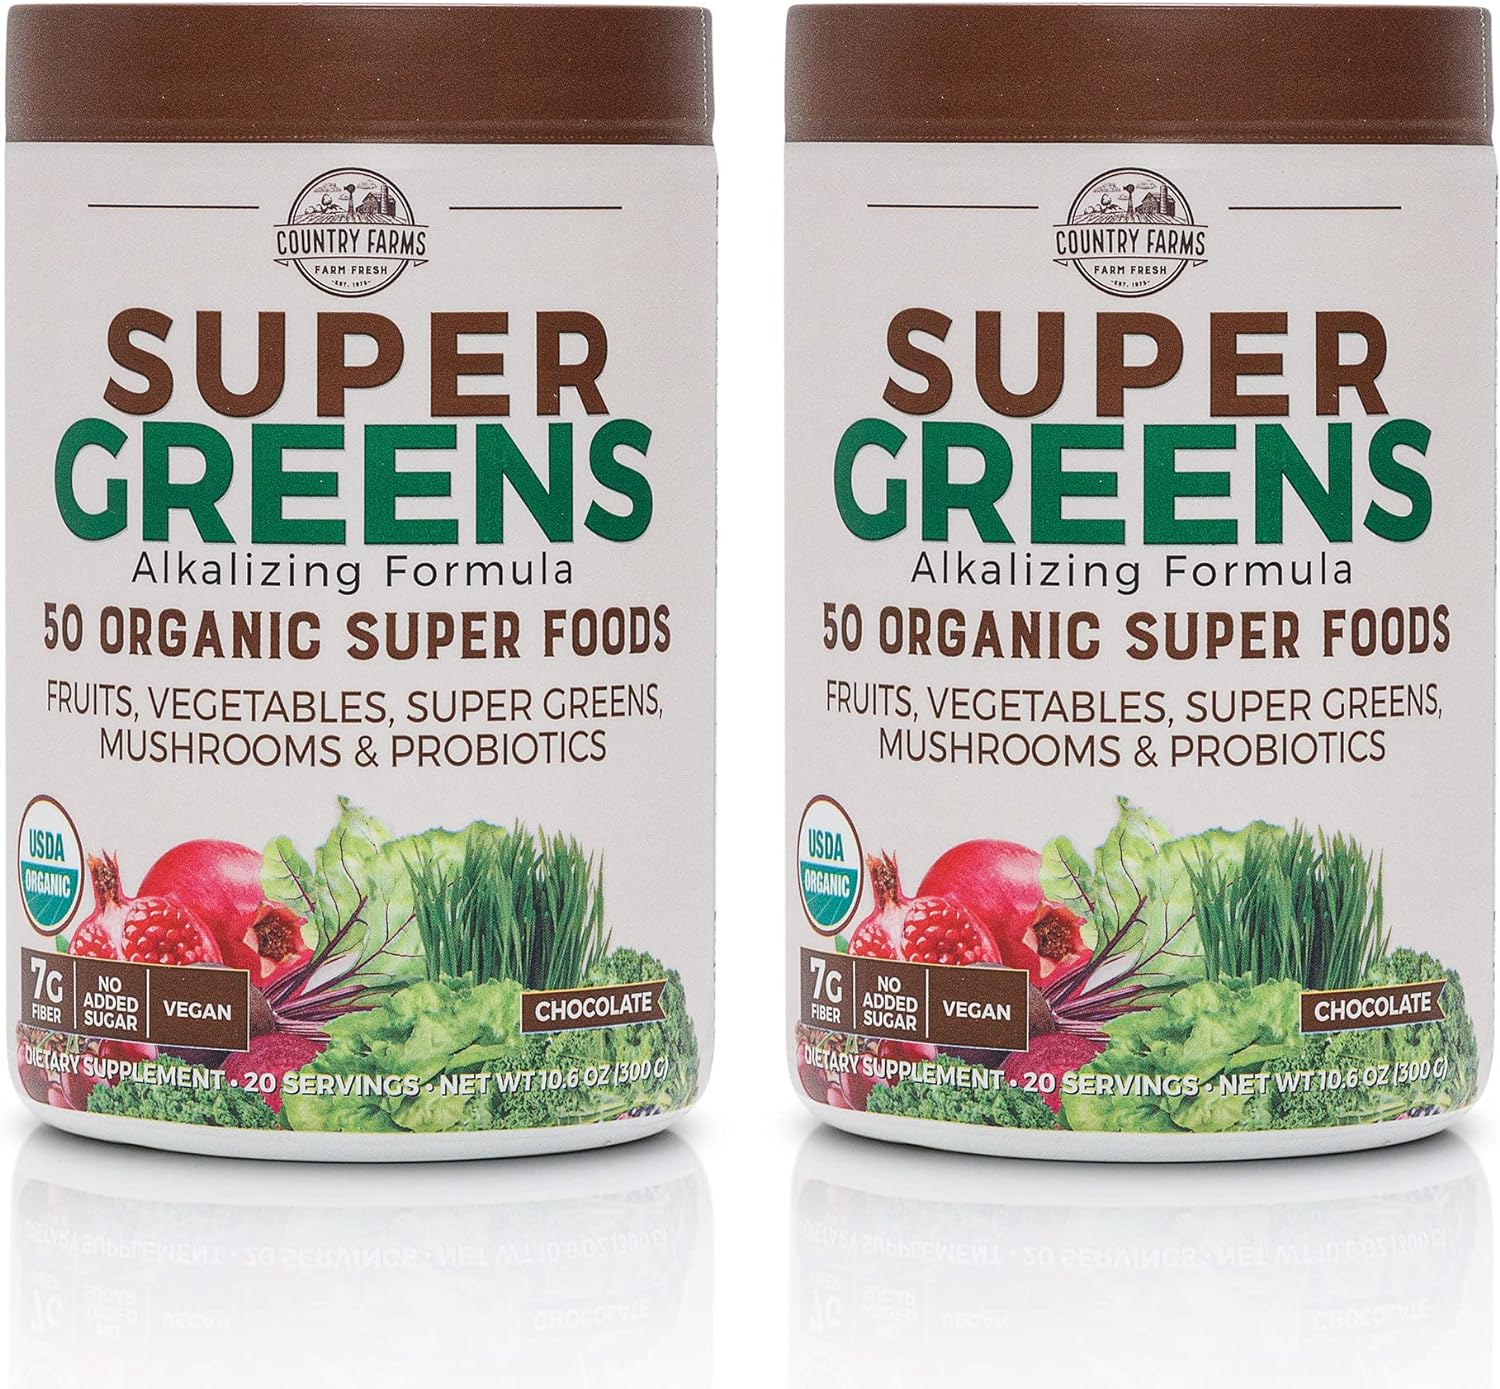 COUNTRY FARMS Super Greens Chocolate Flavor, 50 Organic Super Foods, USDA Organic Drink Mix, Fruits, Vegetables, Super Greens, Mushrooms & Probiotics, Supports Energy, 40 Servings, 10.6 Oz, 2 Pack